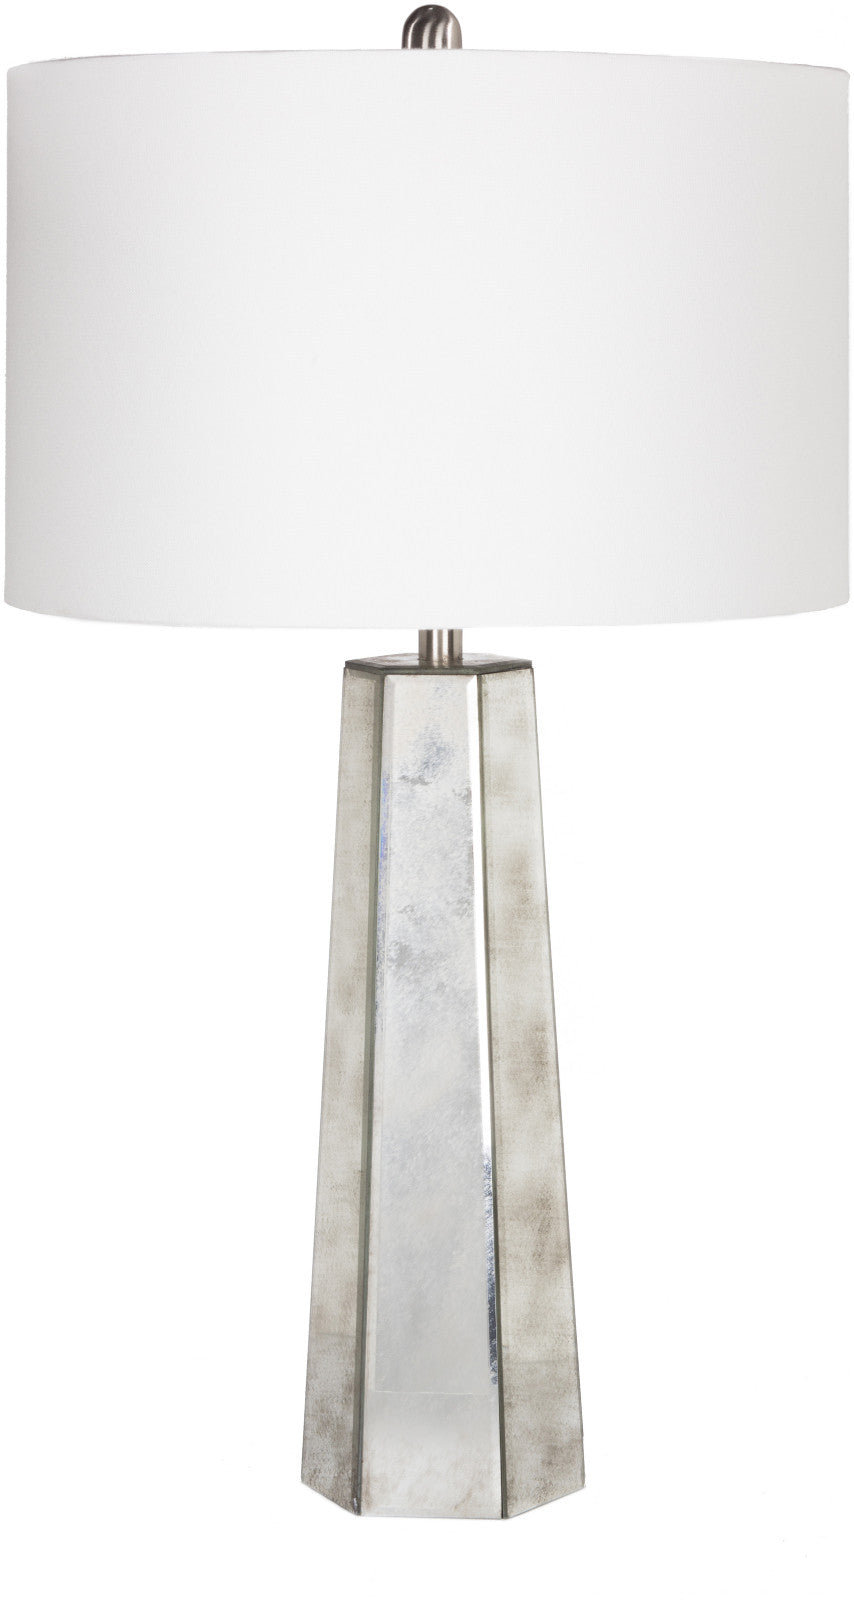 Surya Perry PRLP-001 White Lamp Table Lamp